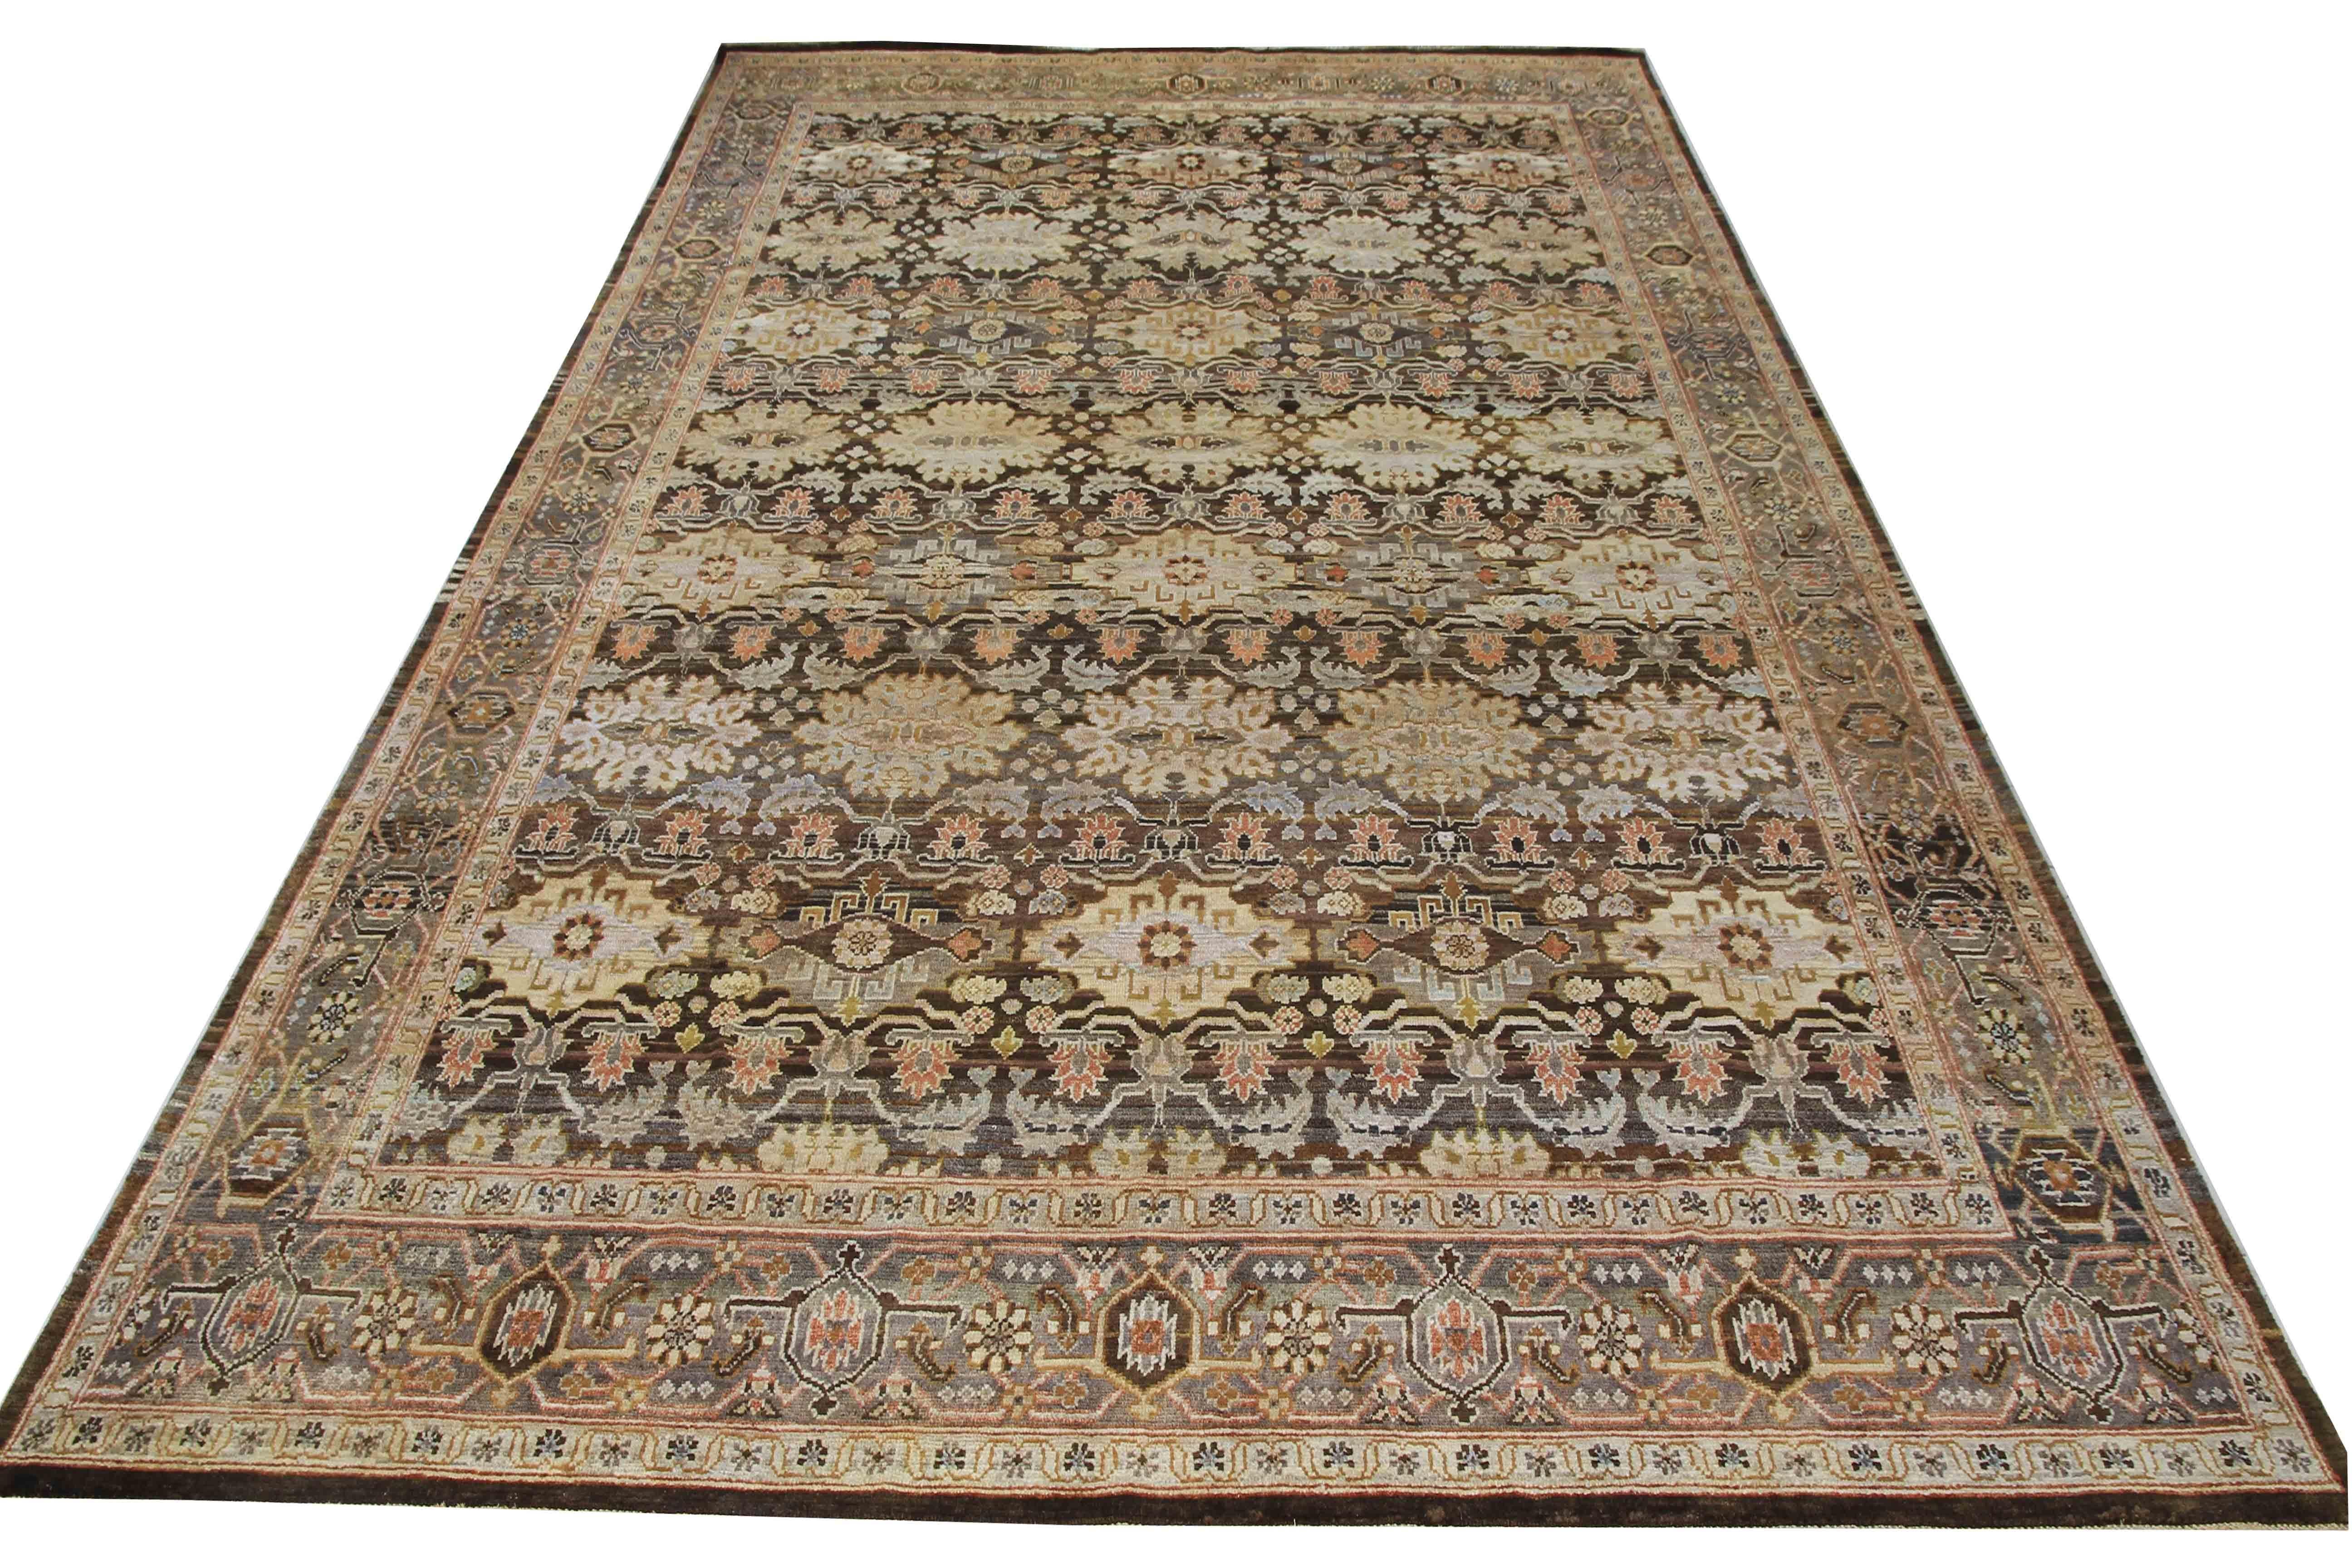 Hand-knotted in Jaipur, India, this antique vegetable dye rug is a masterpiece of weaving craftsmanship. Measuring 8'8'' x 12'9'', this rug features an elaborate web of distinct motifs executed in black and ivory hues. The intricate design showcases